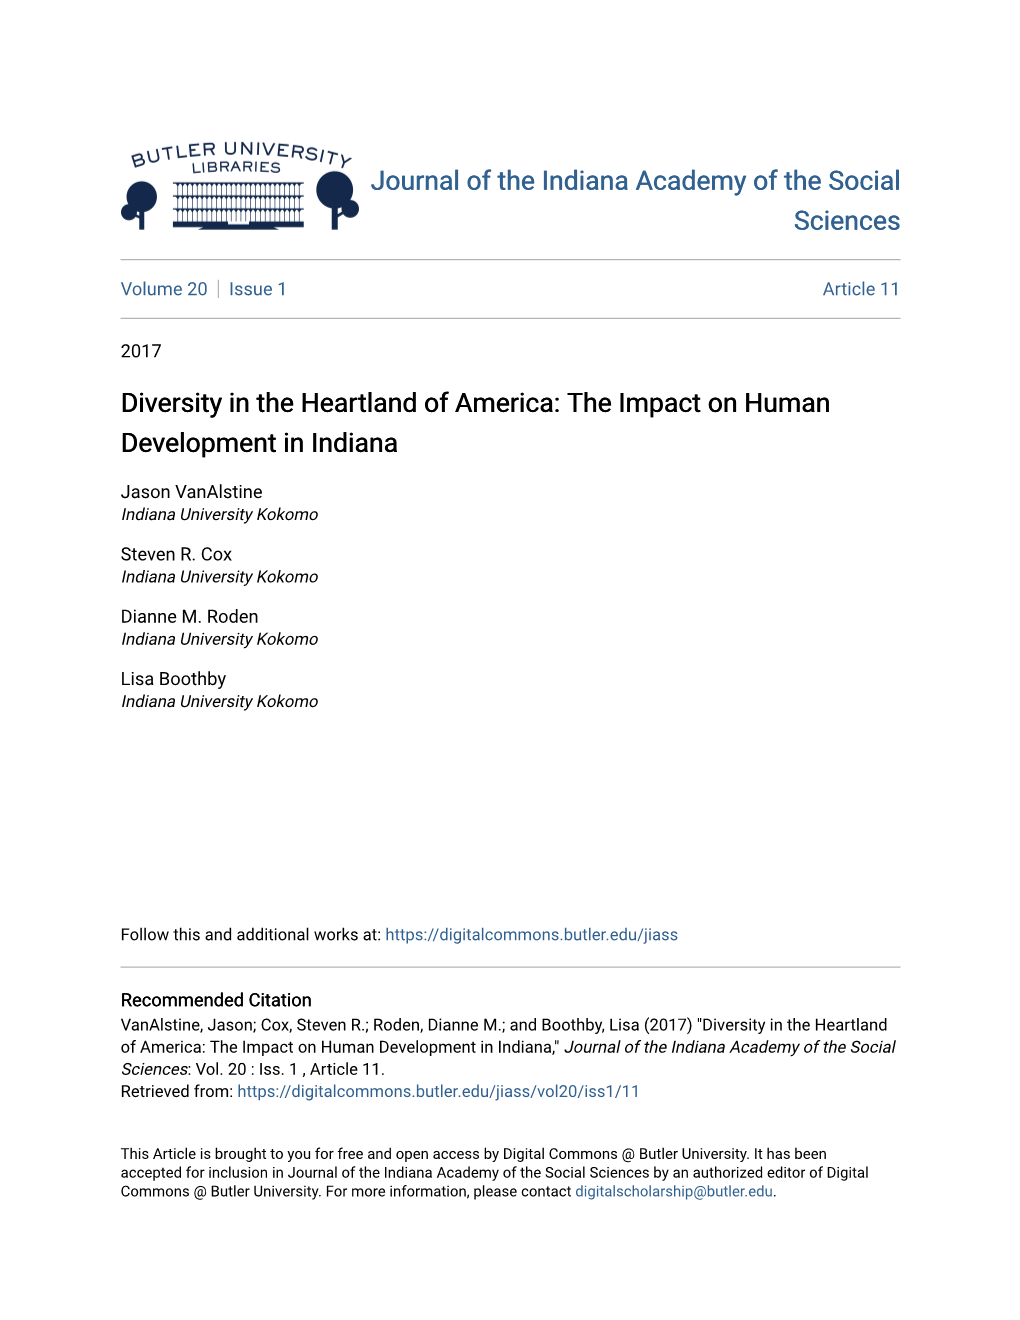 Diversity in the Heartland of America: the Impact on Human Development in Indiana